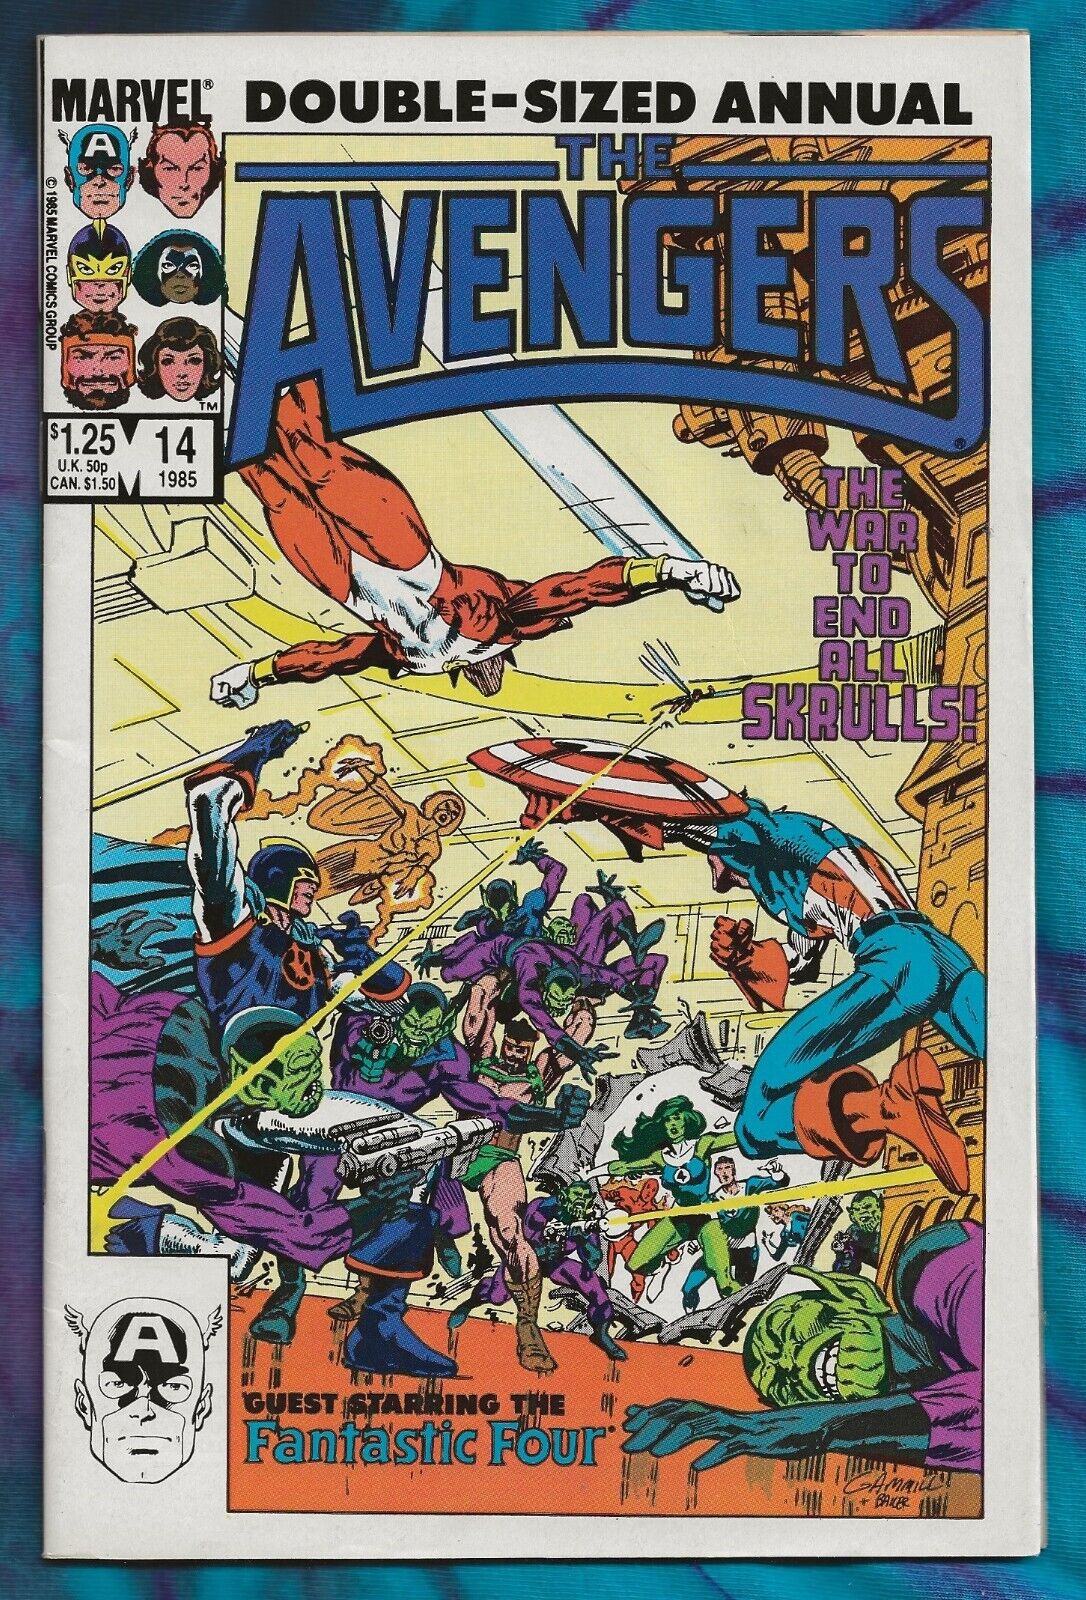 AVENGERS ANNUAL #14. Secret Invasion Tie-in with the Fantastic Four. 1985 Marvel